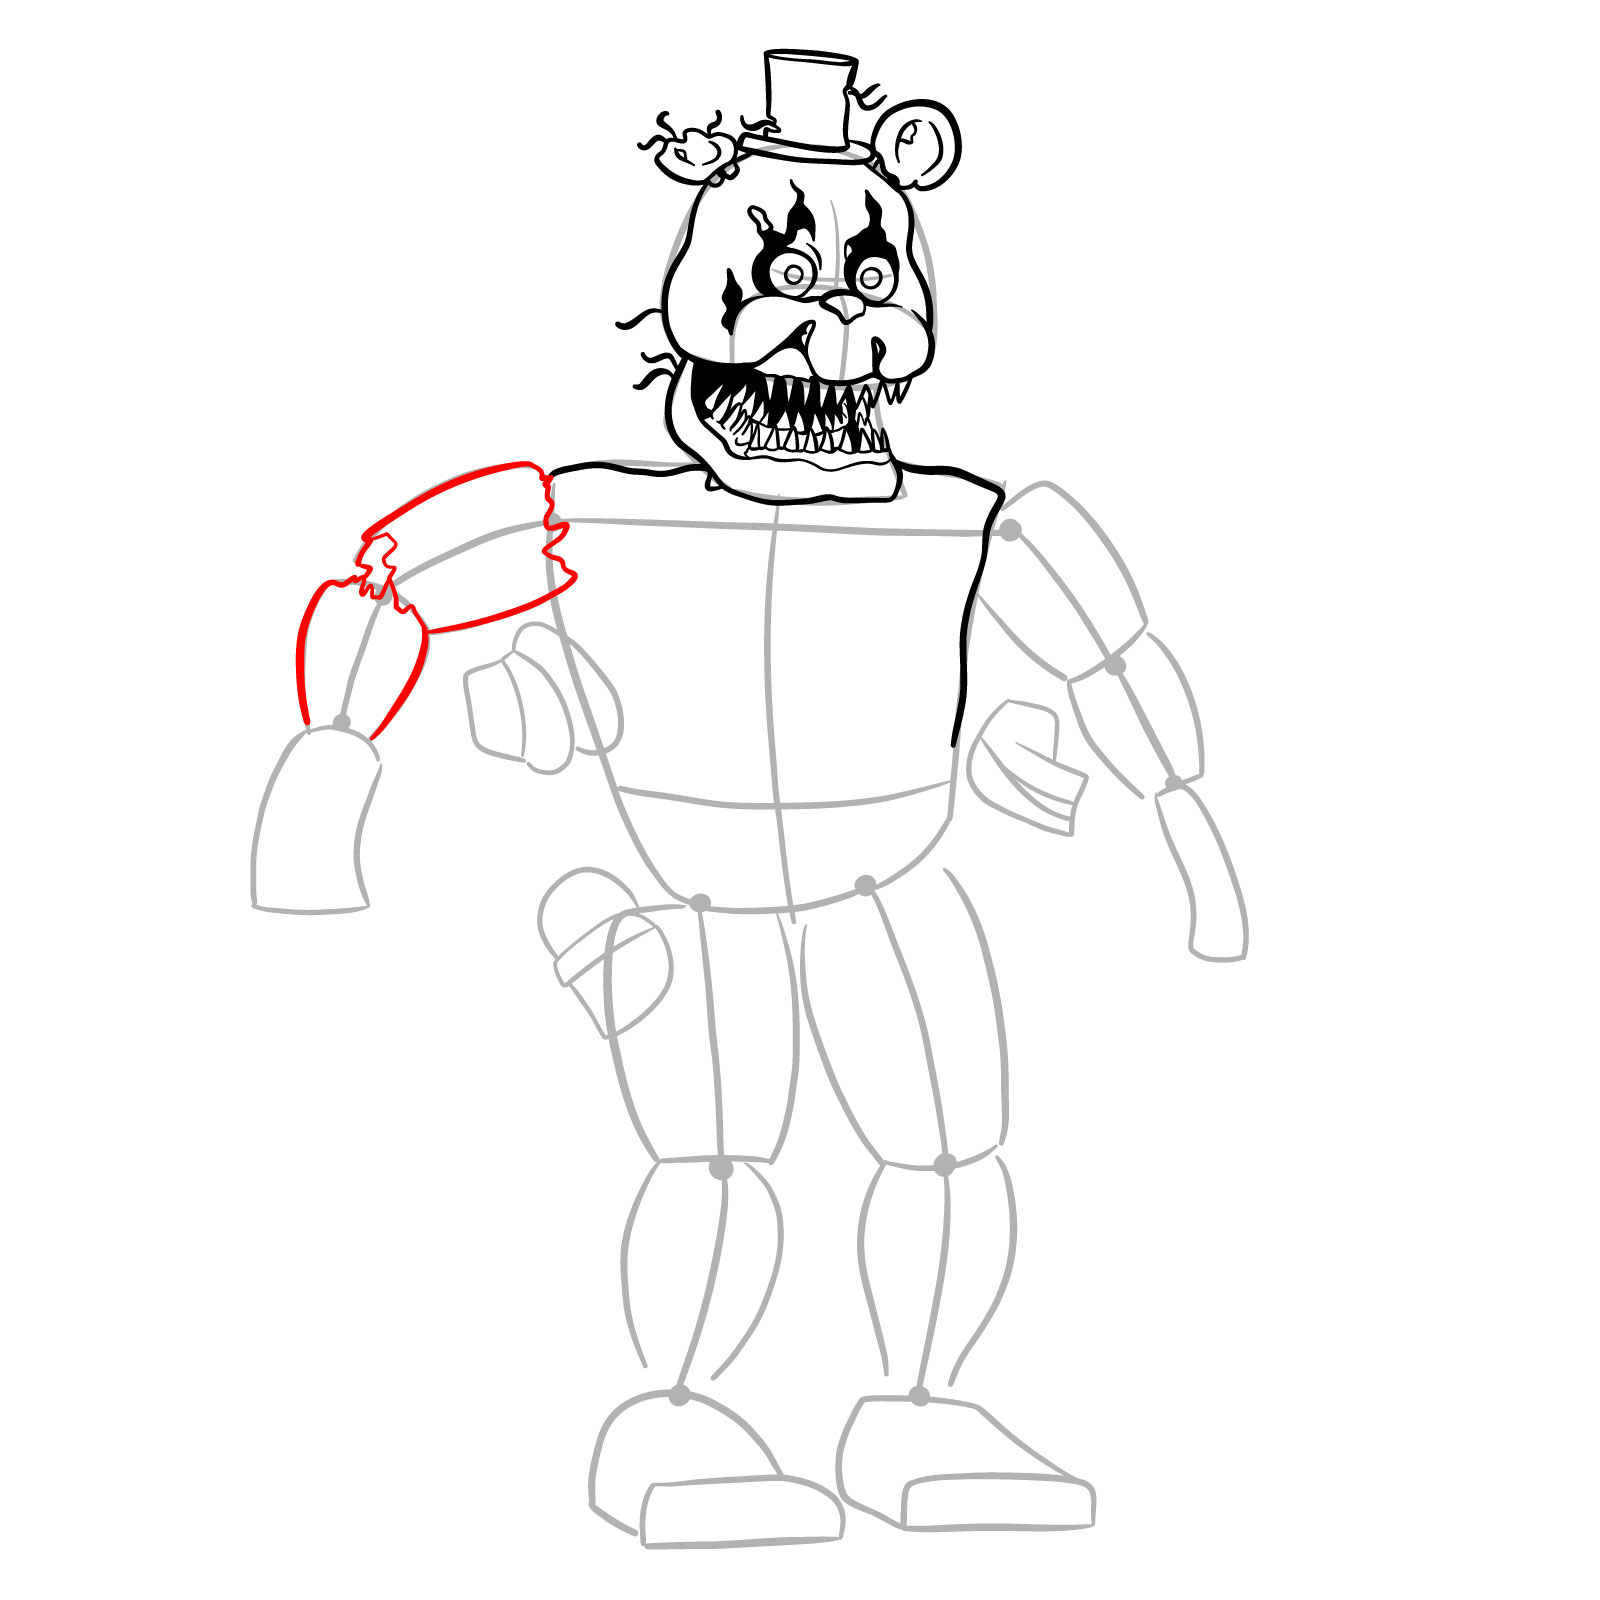 How to draw Nightmare Freddy - step 18